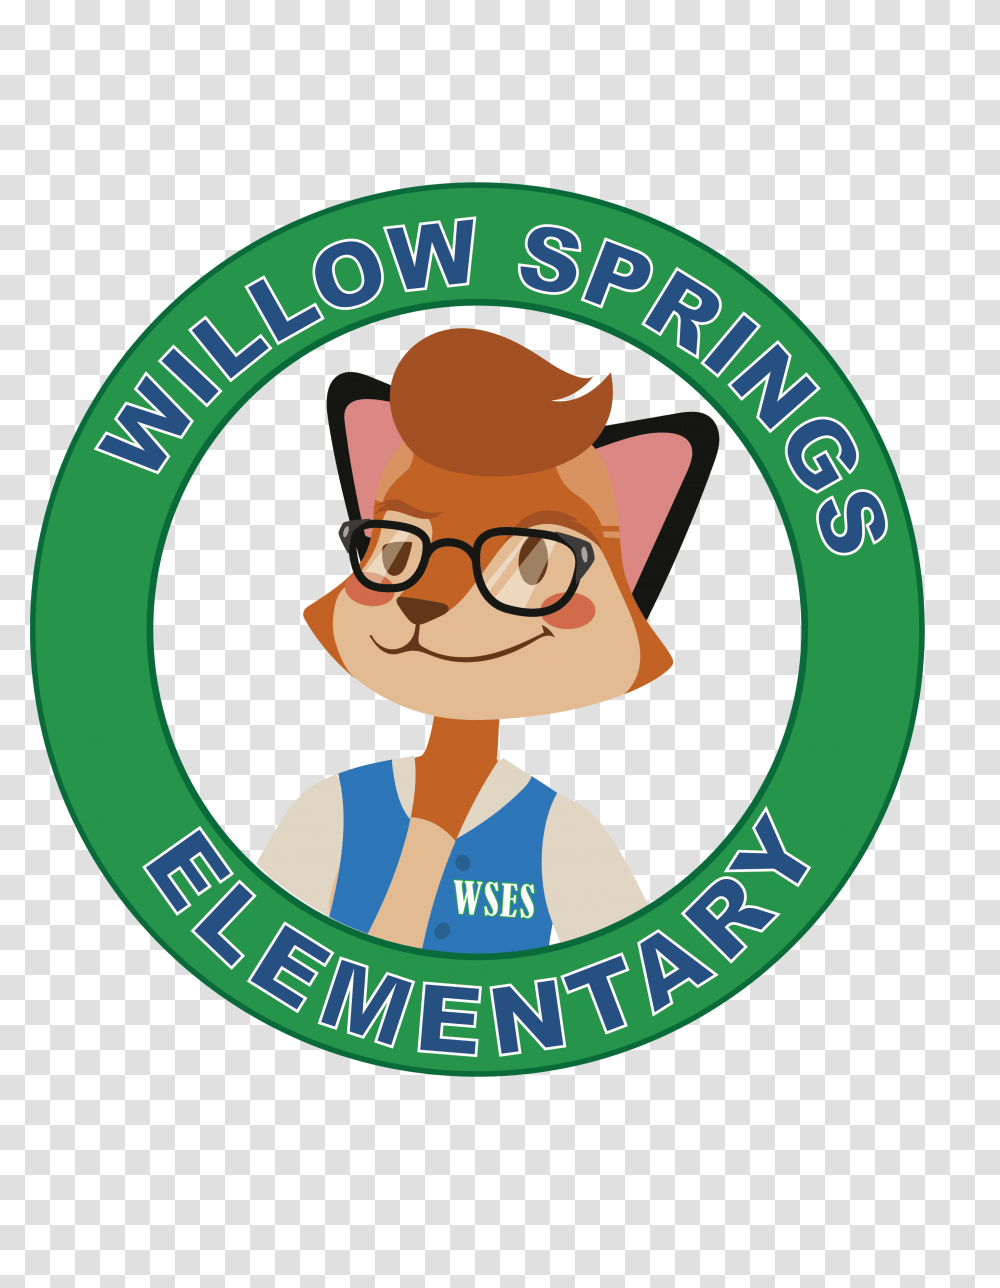 School Counseling Willow Springs Elementary, Label, Logo Transparent Png